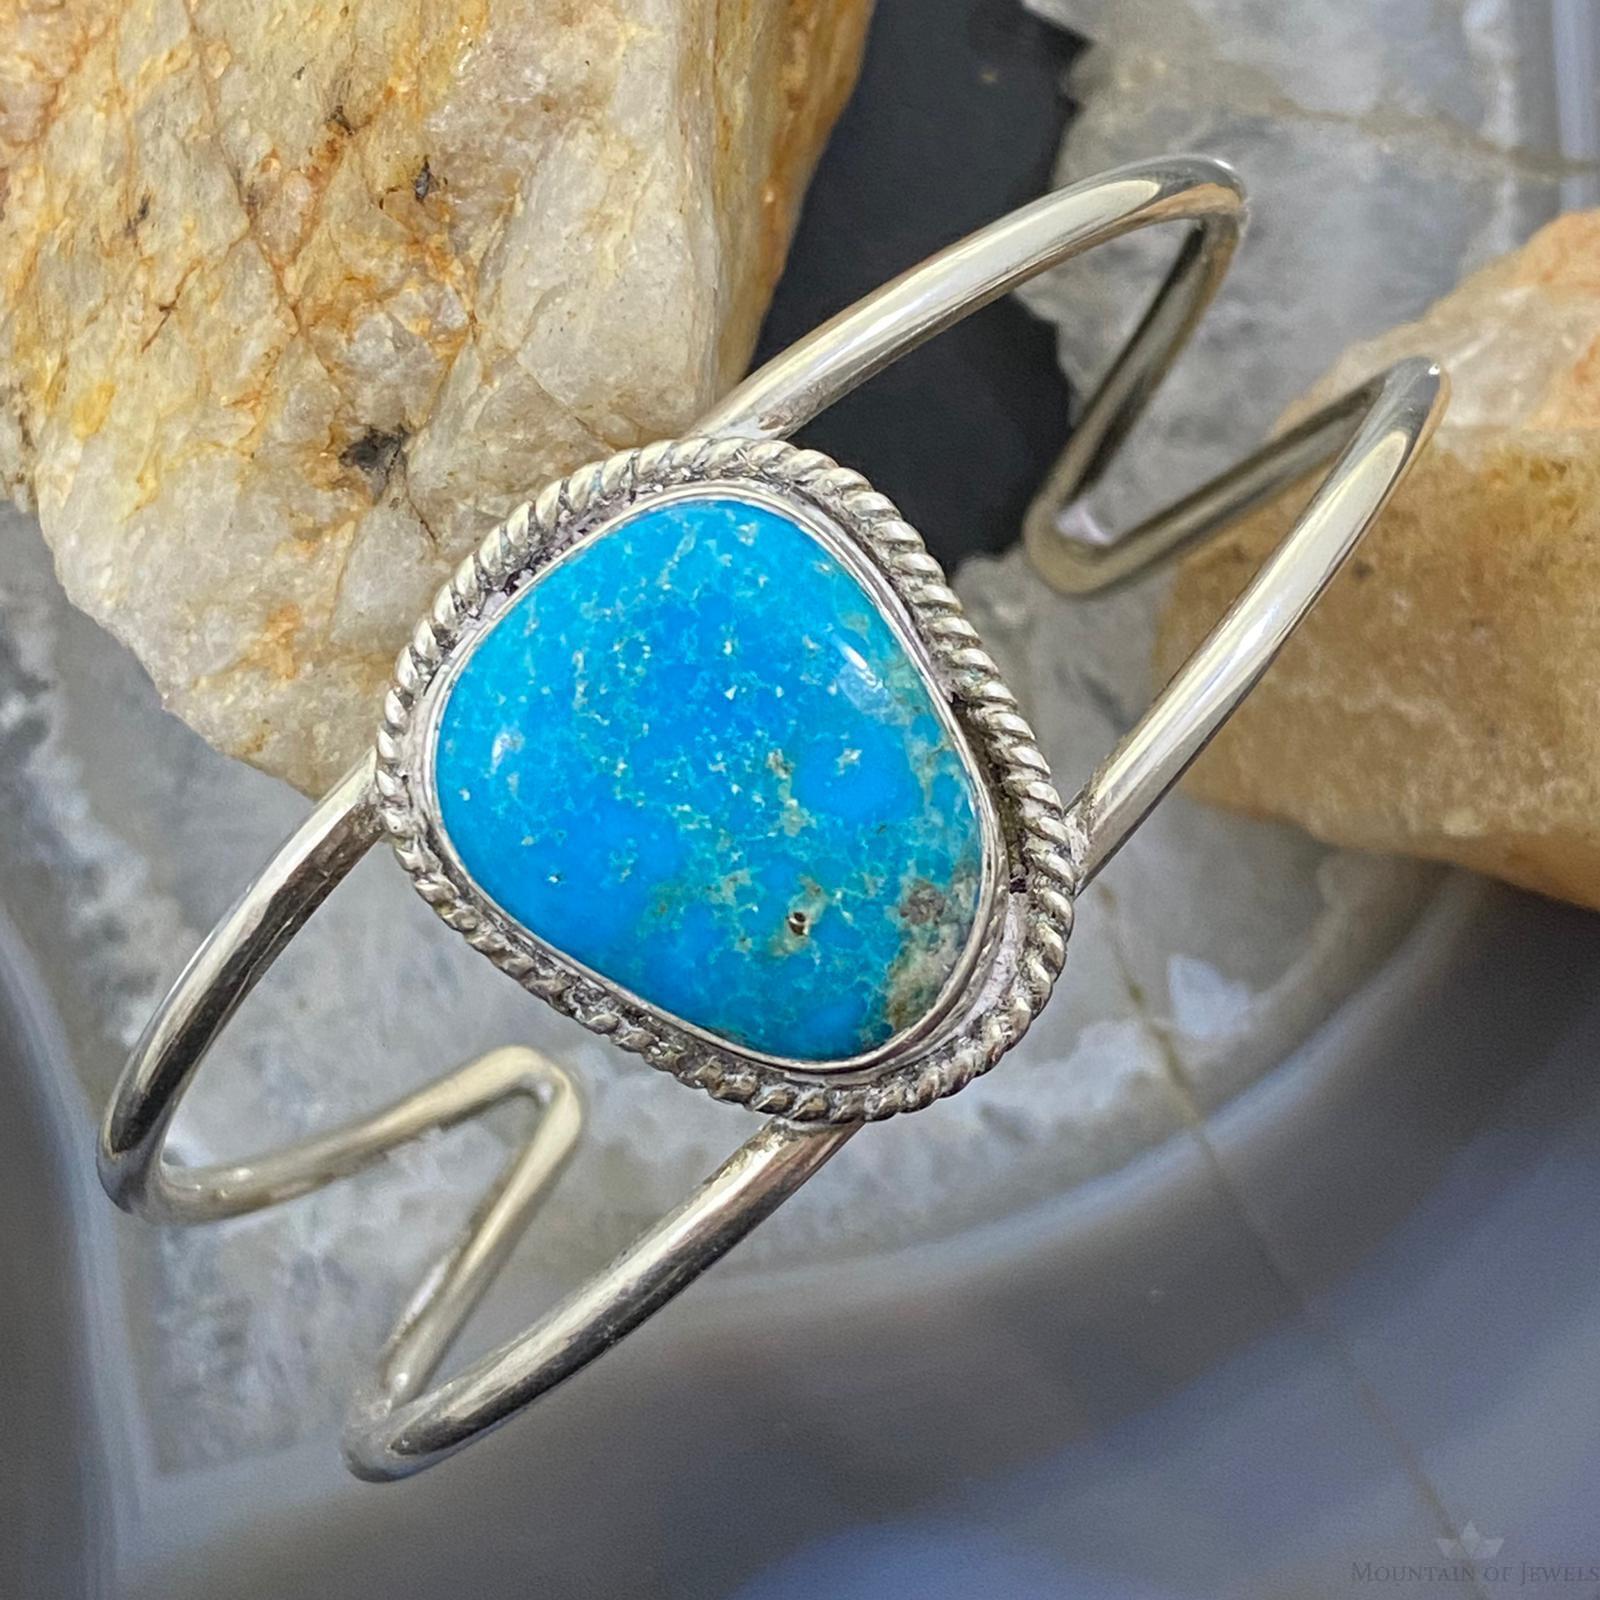 Authentic Native American Silver & Turquoise Bracelet